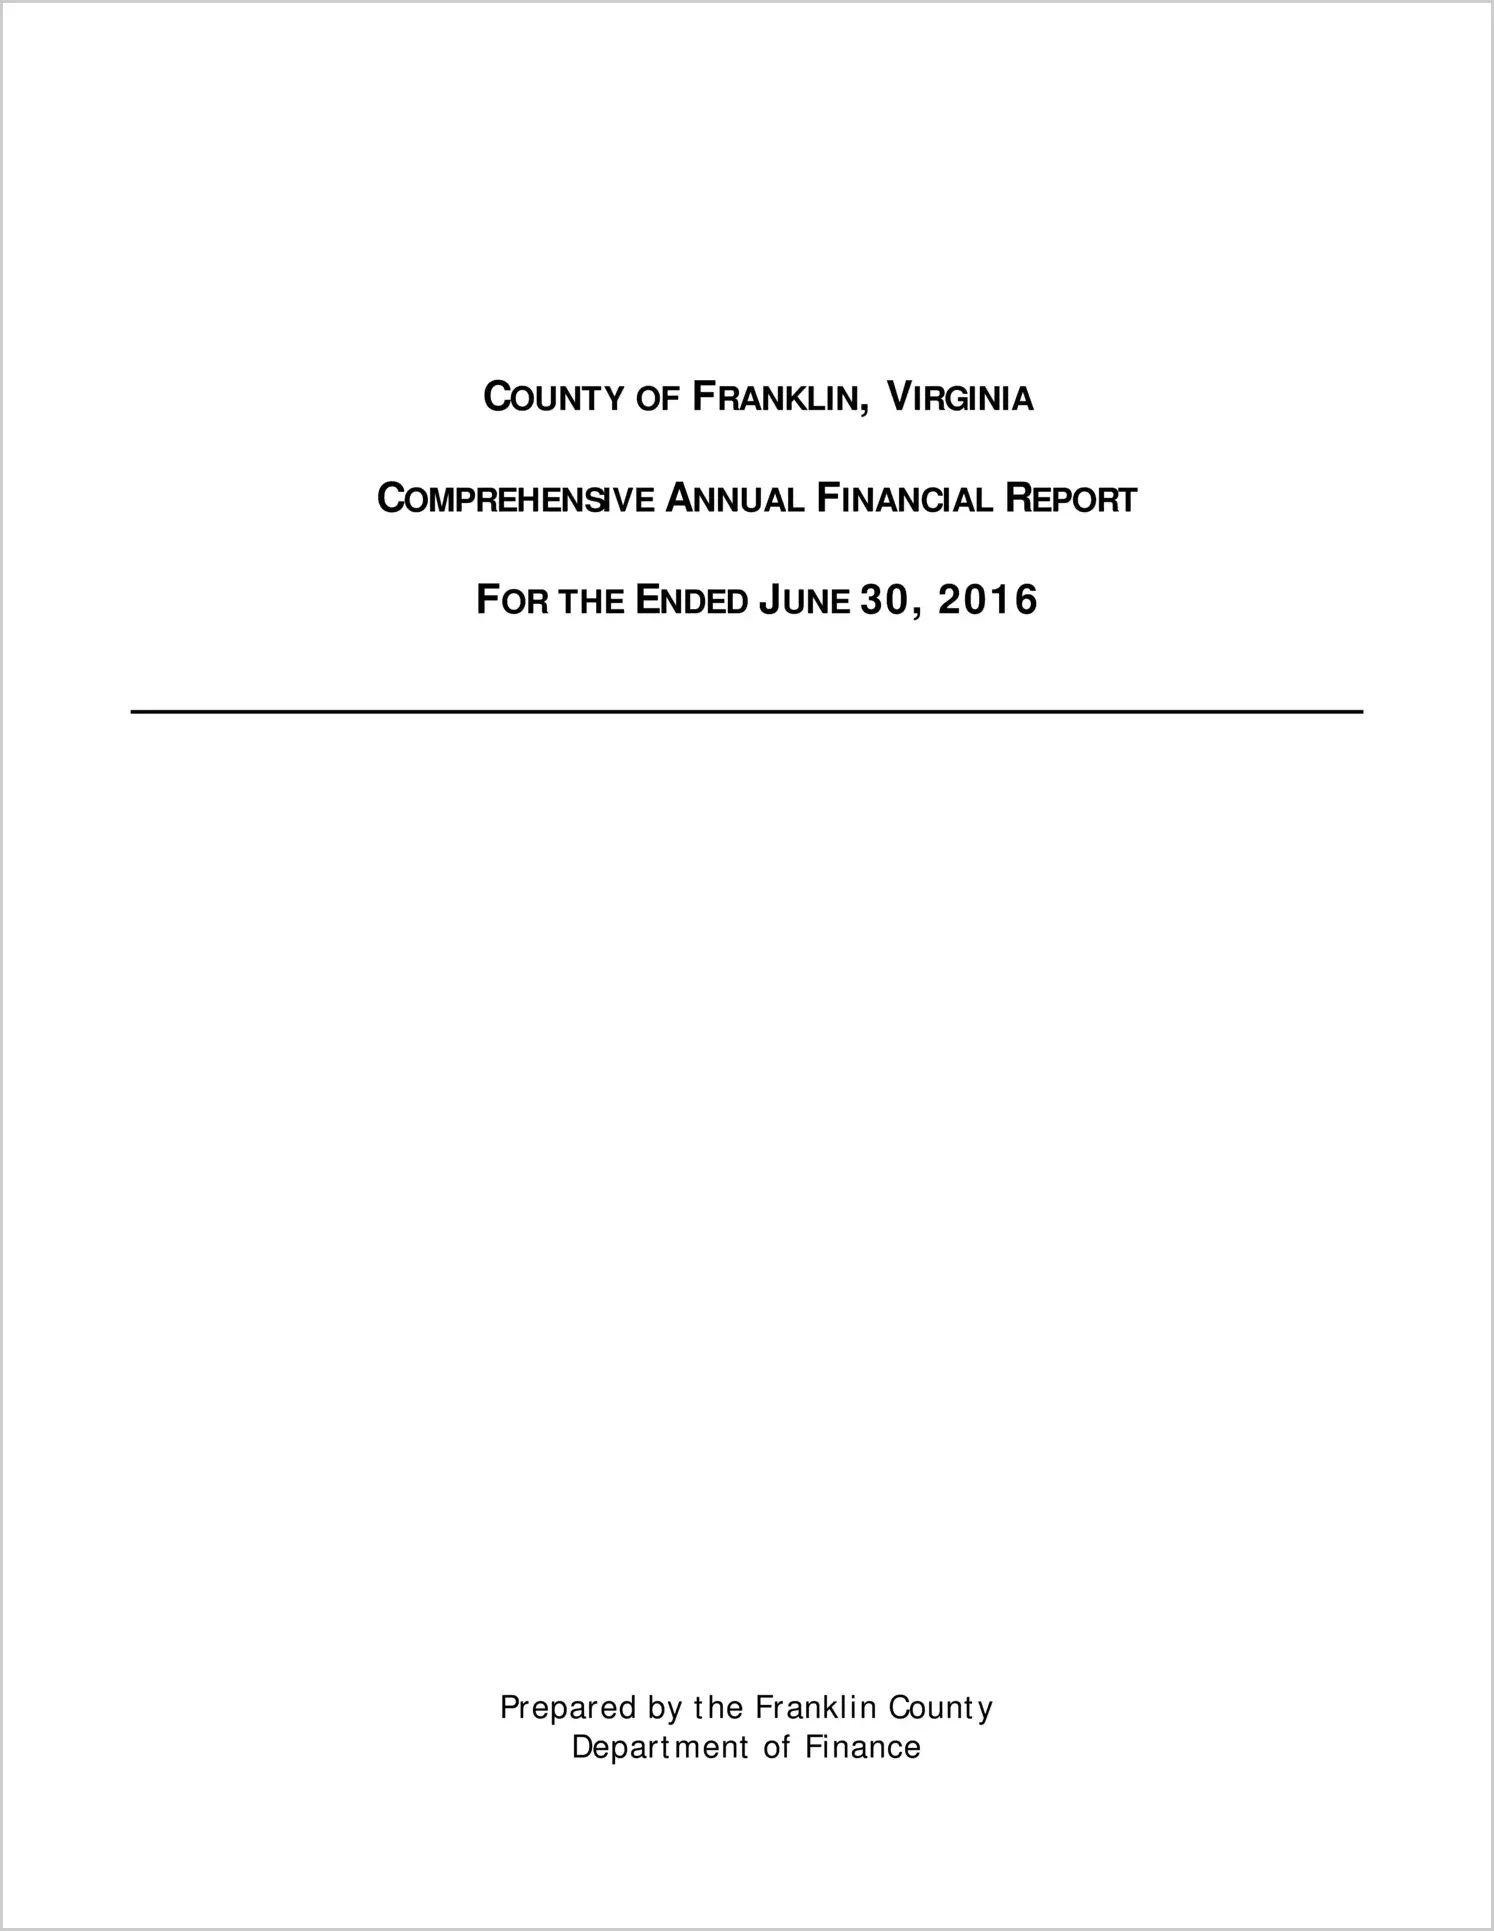 2016 Annual Financial Report for County of Franklin